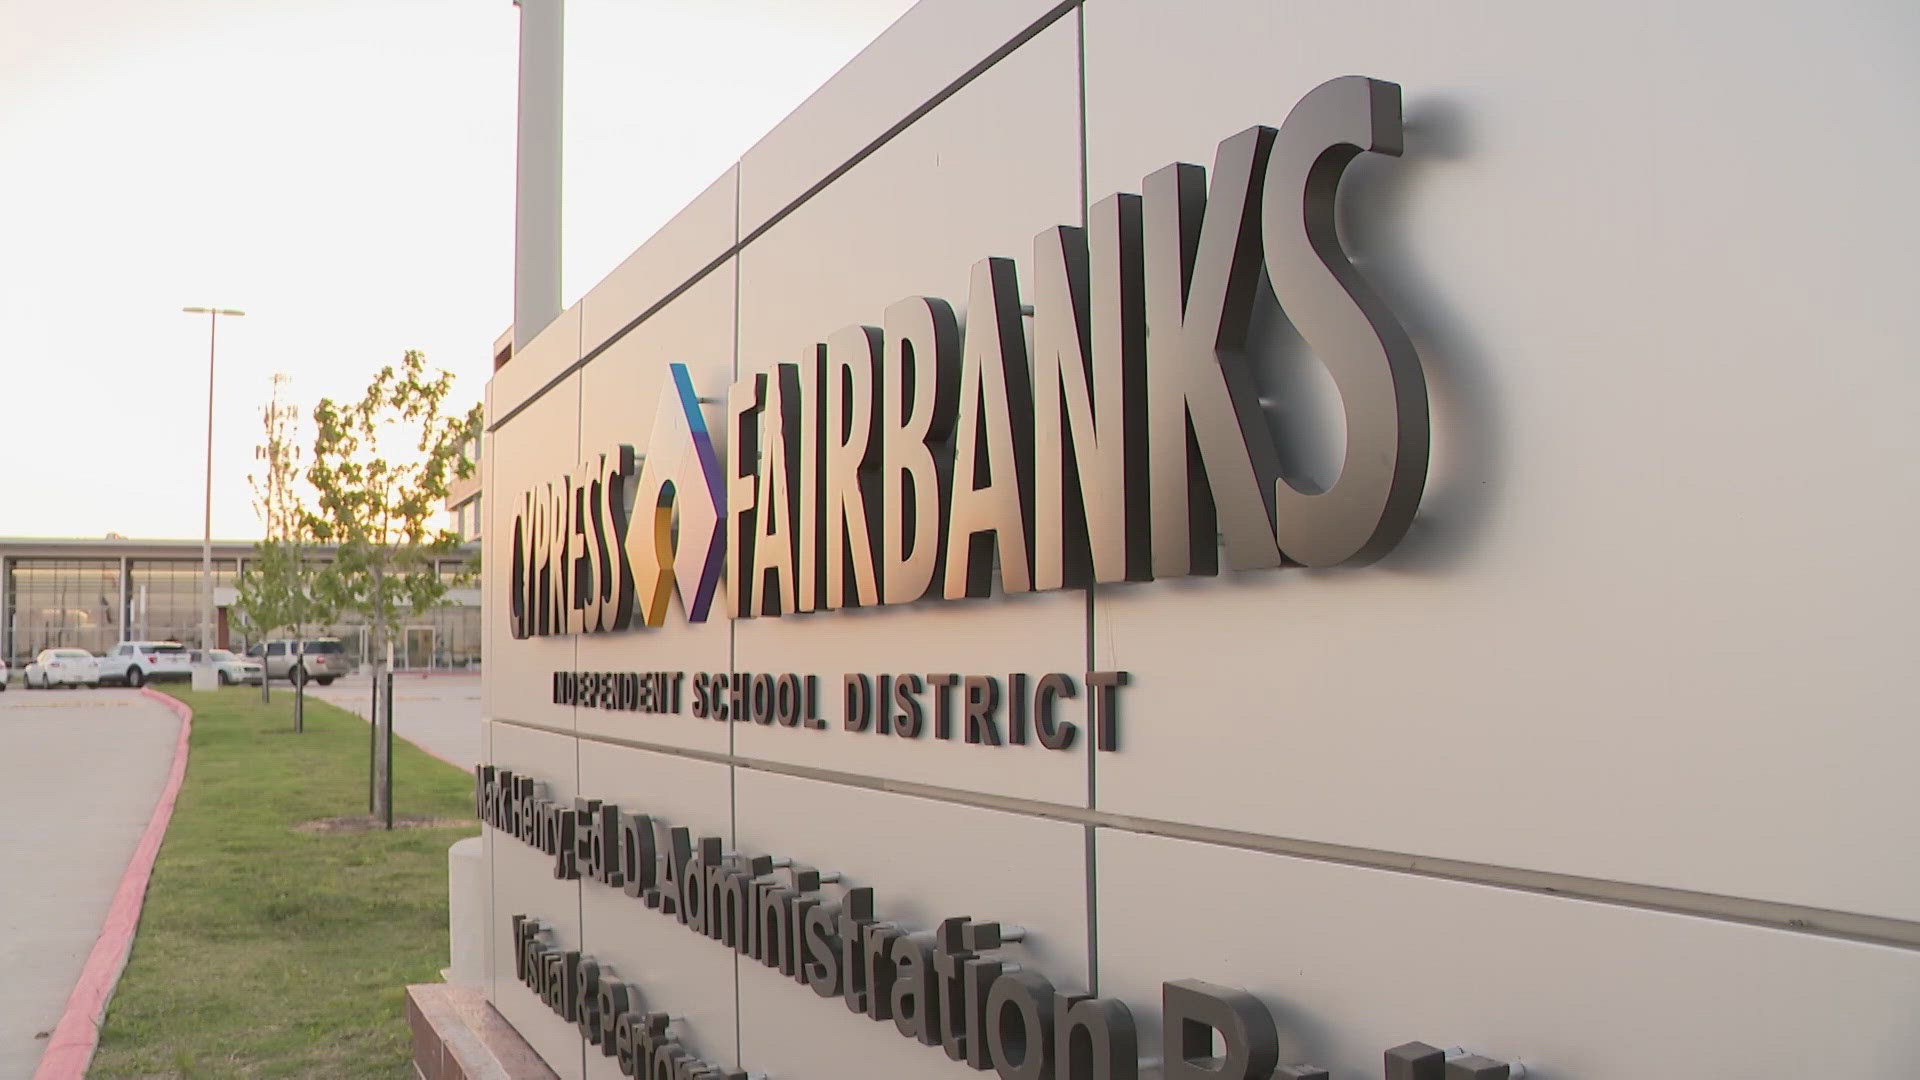 Cypress-Fairbanks ISD has a budget problem. District leaders held a special meeting Monday night to figure out how to close a $68 million budget shortfall.